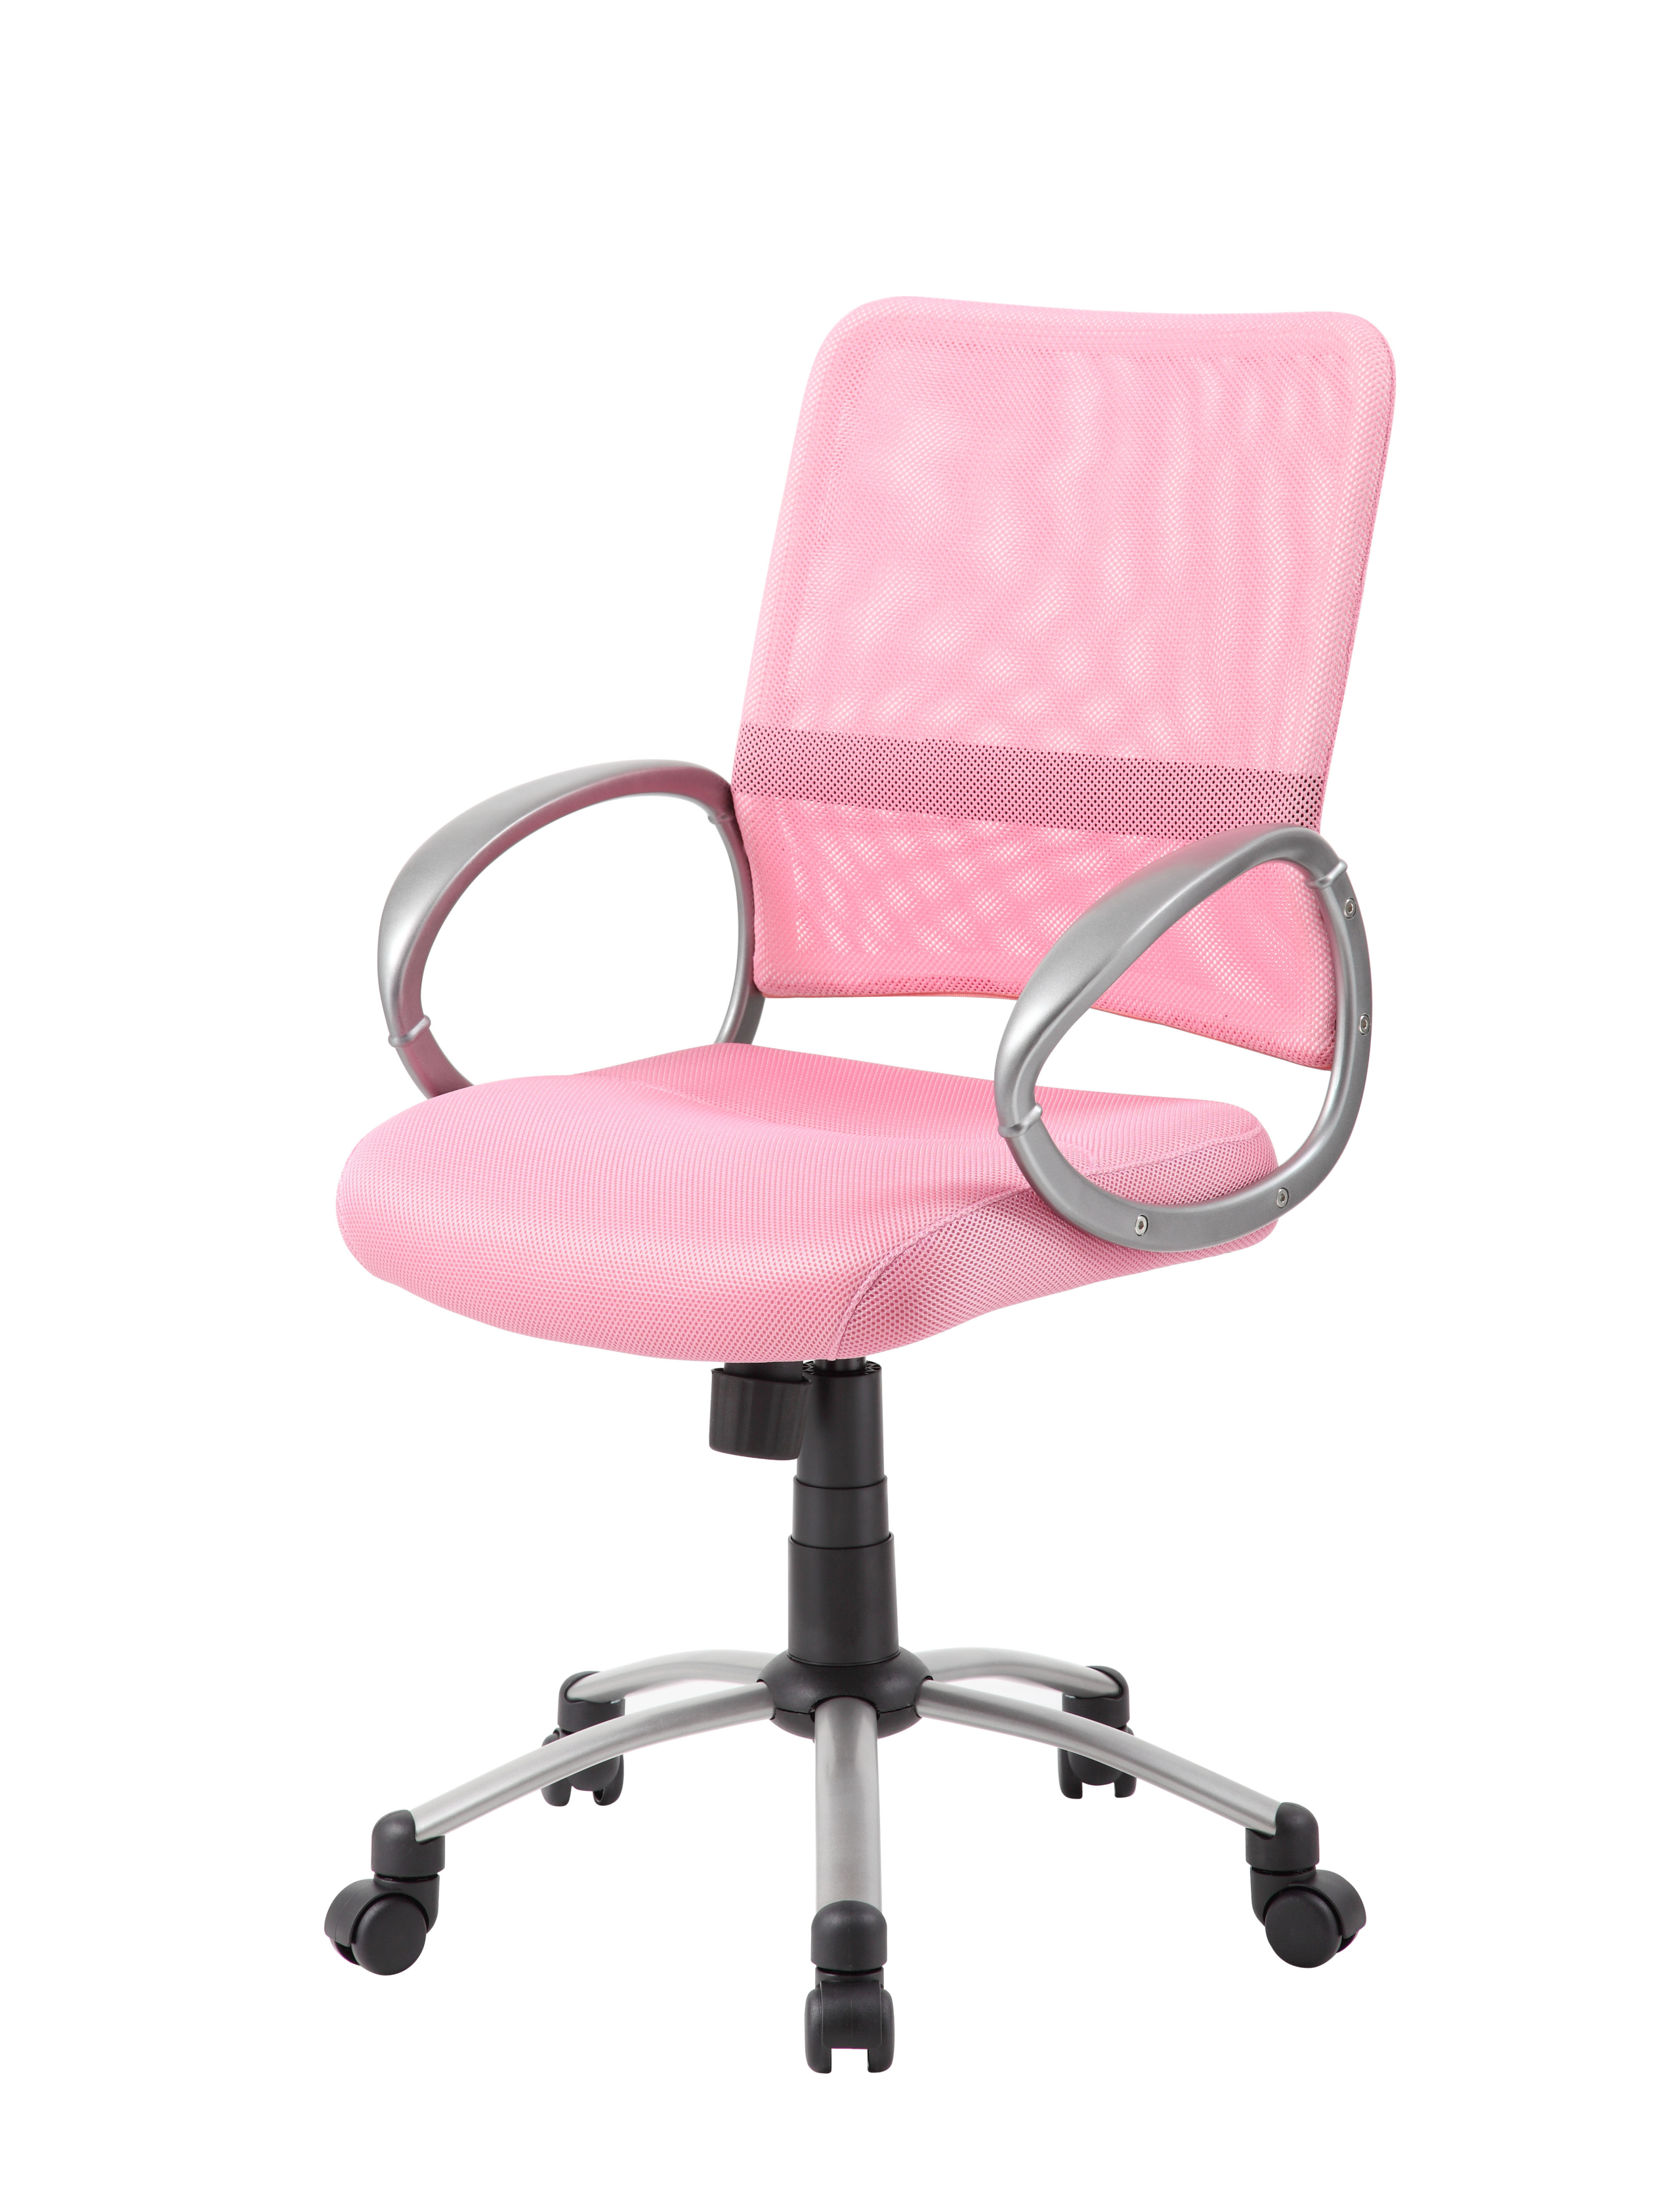 Pink swivel chairs 2